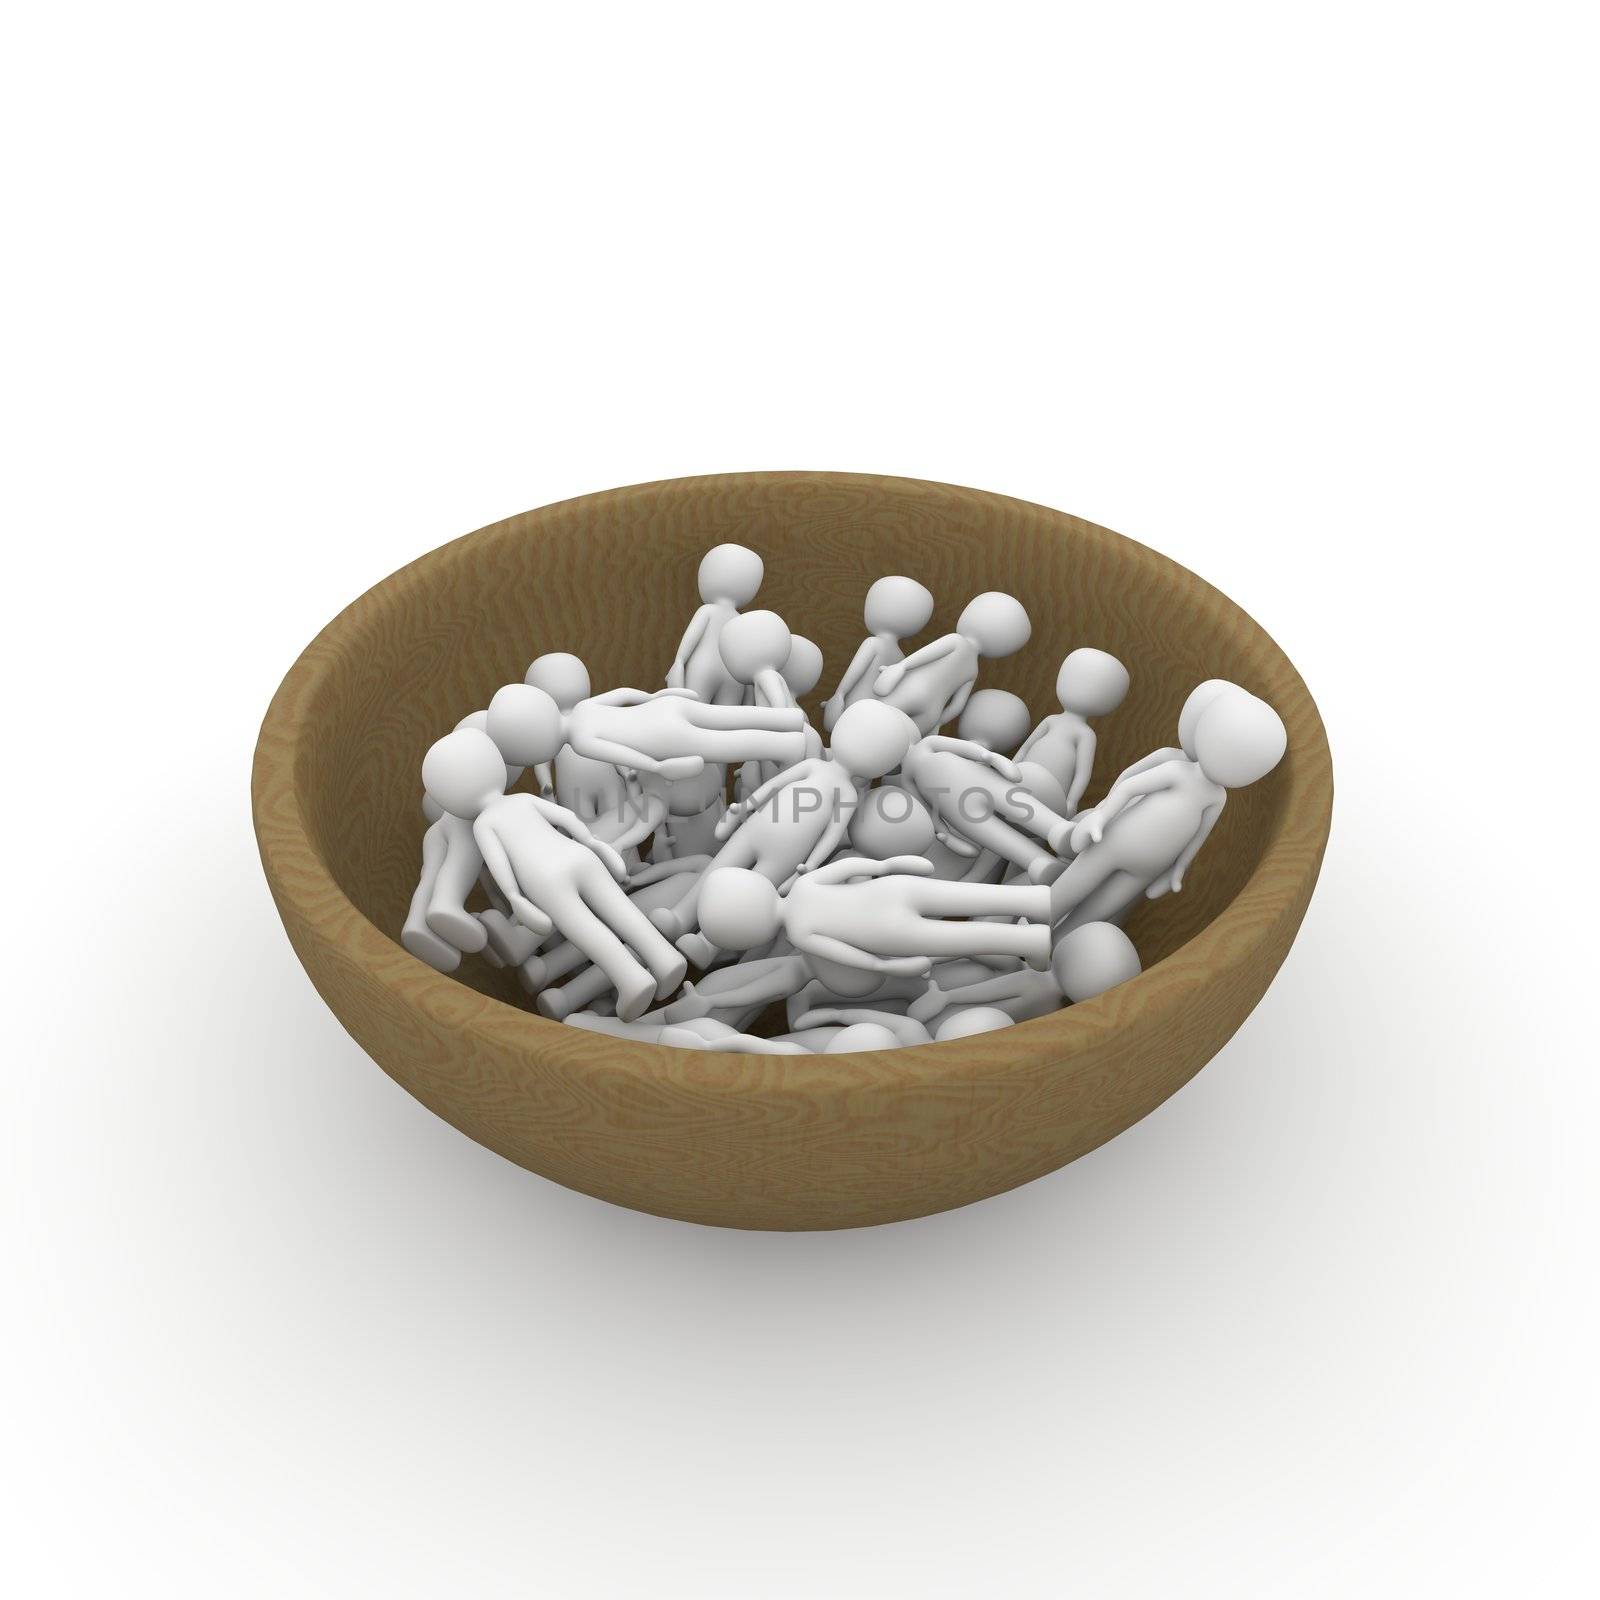 A bowl full of people  by 3DAgentur